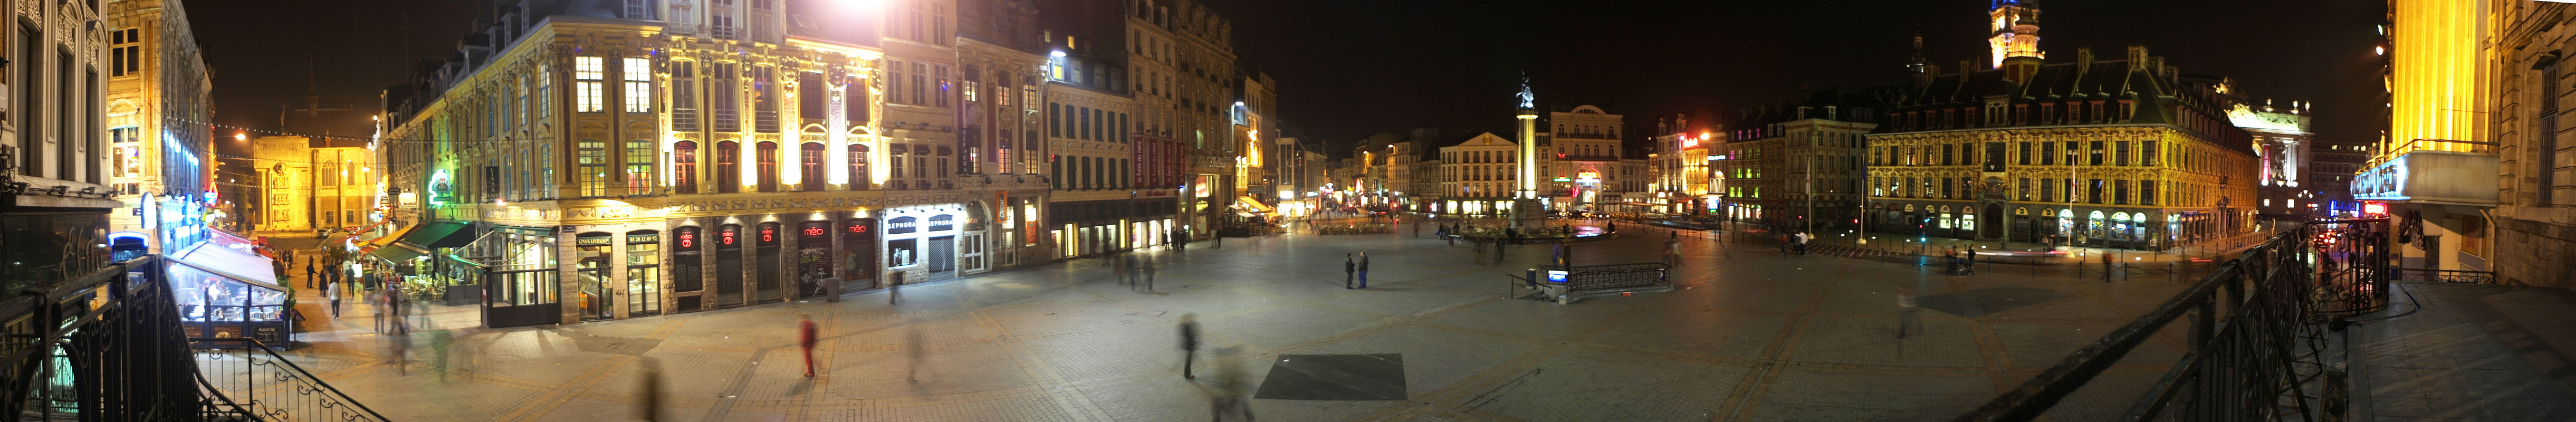 Lille Main Square by night